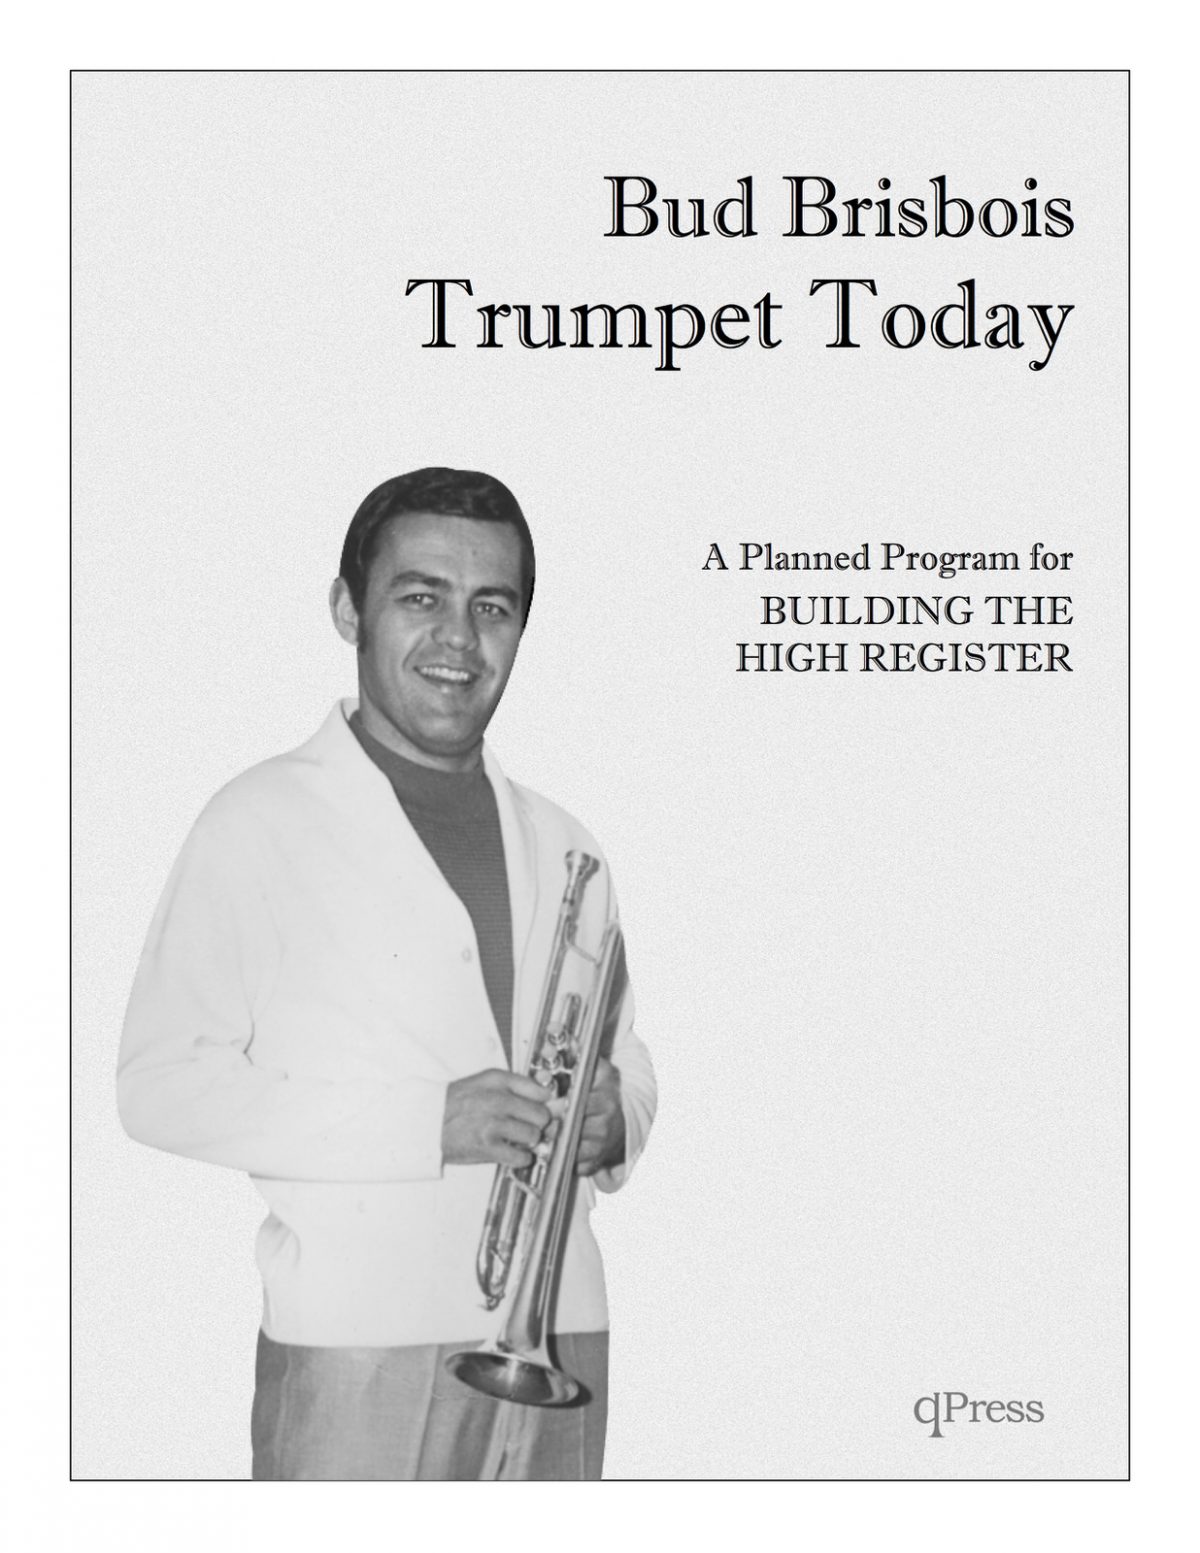 brisbois-trumpet-today-a-planned-program-for-building-the-high-register